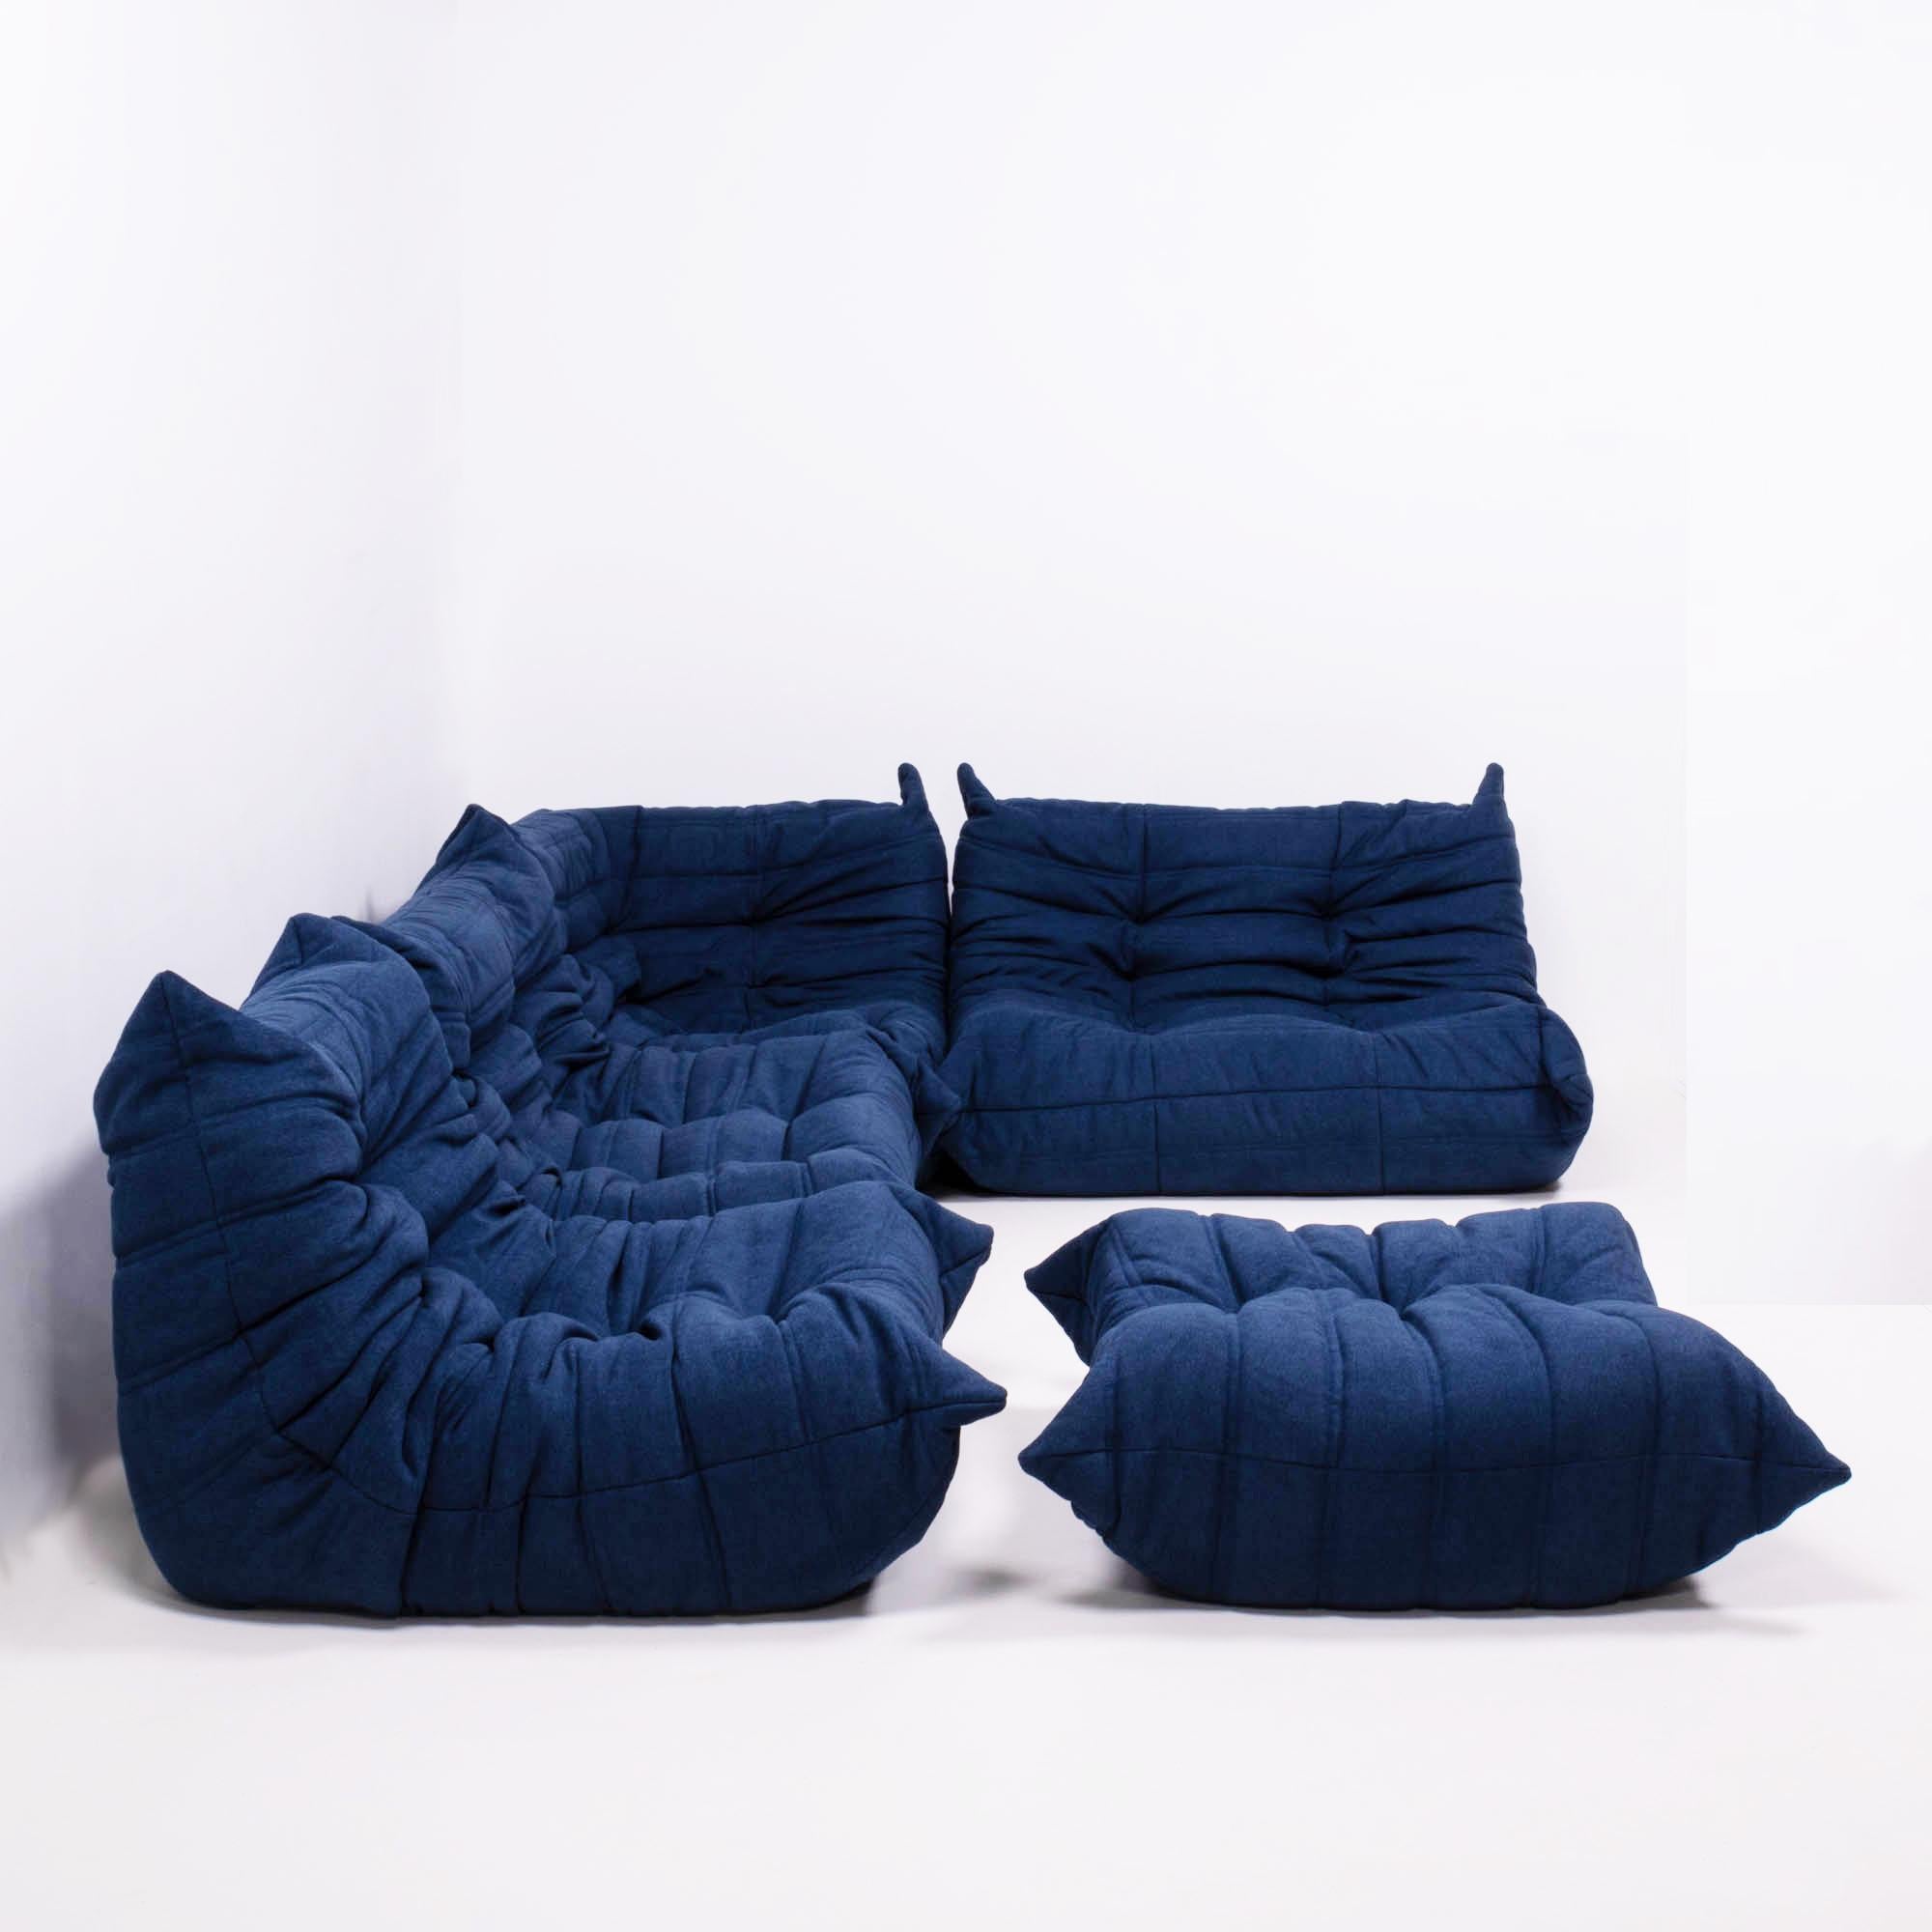 The iconic Togo sofa, originally designed by Michel Ducaroy for Ligne Roset in 1973, has become a design Classic. 

This five piece modular set is incredibly versatile and can be configured into one large corner sofa or split for a multitude of